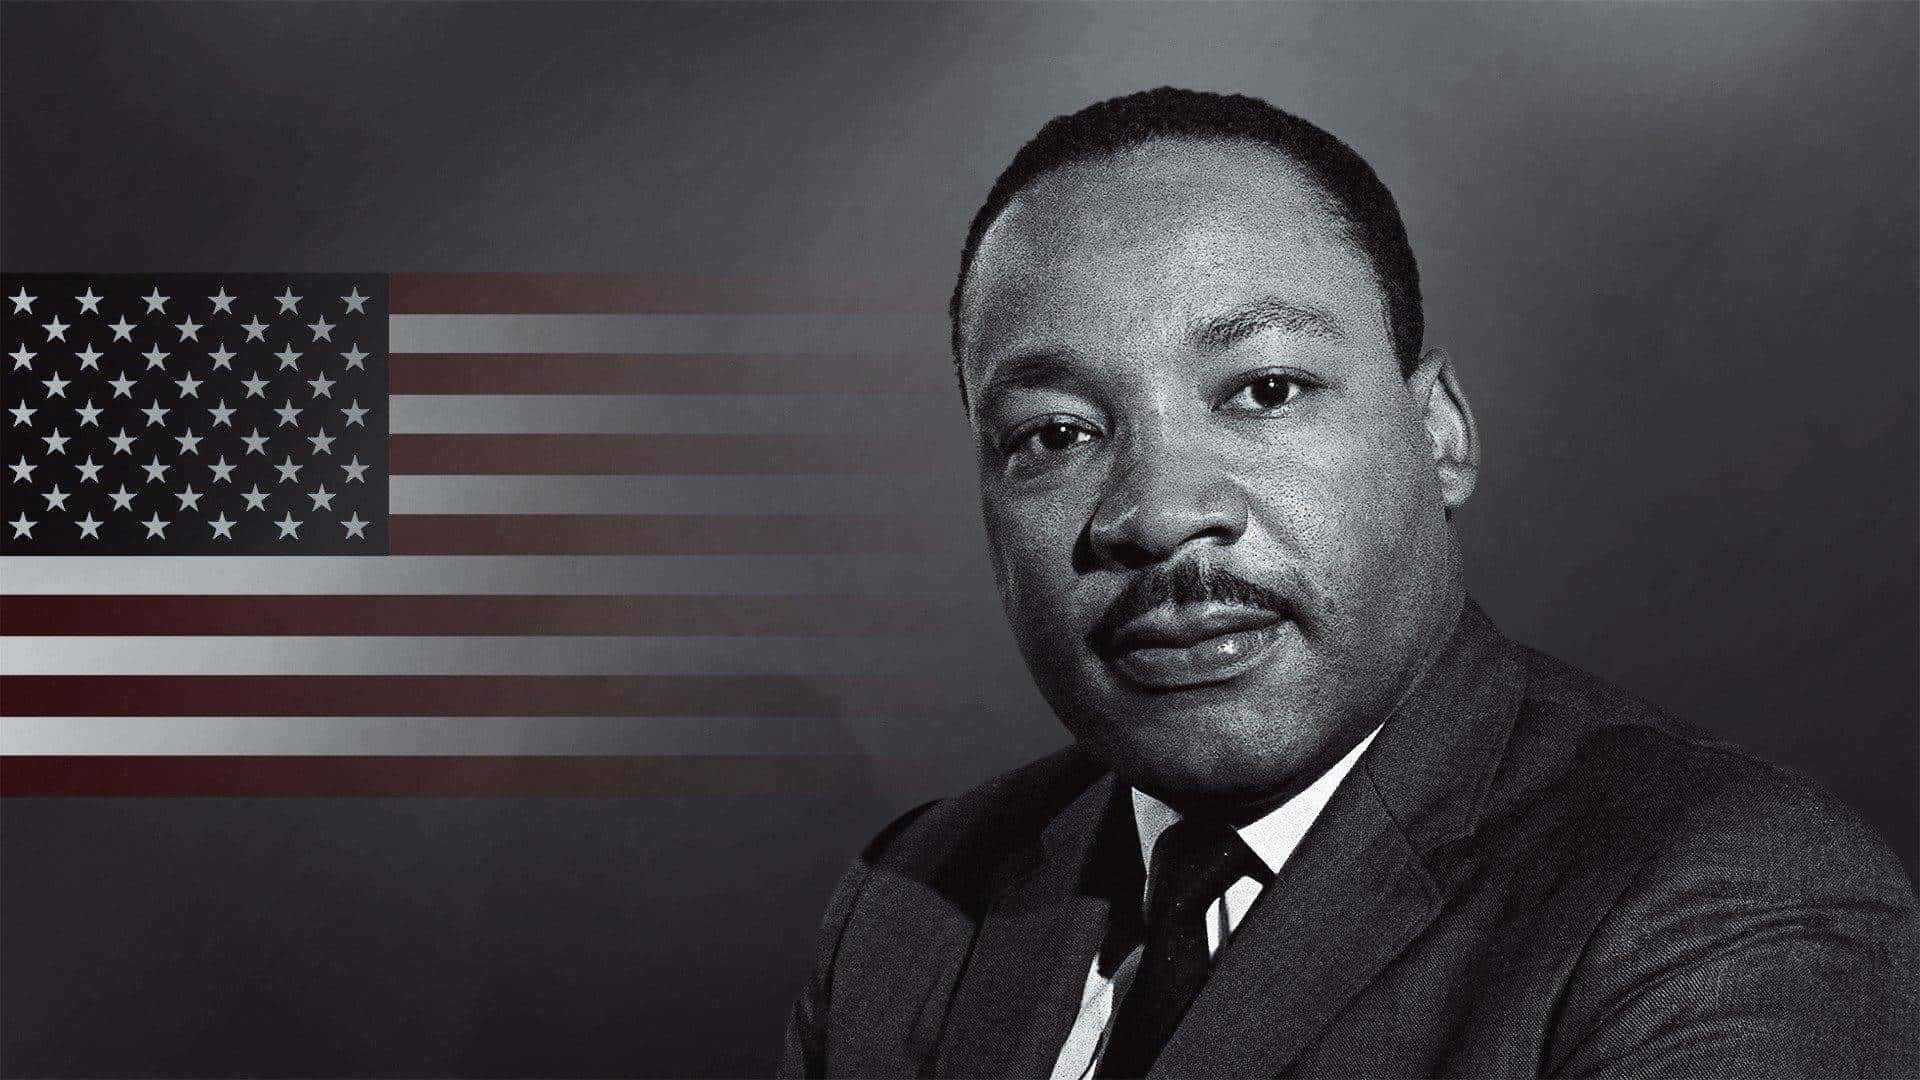 Magnificent Activist Martin Luther King Background